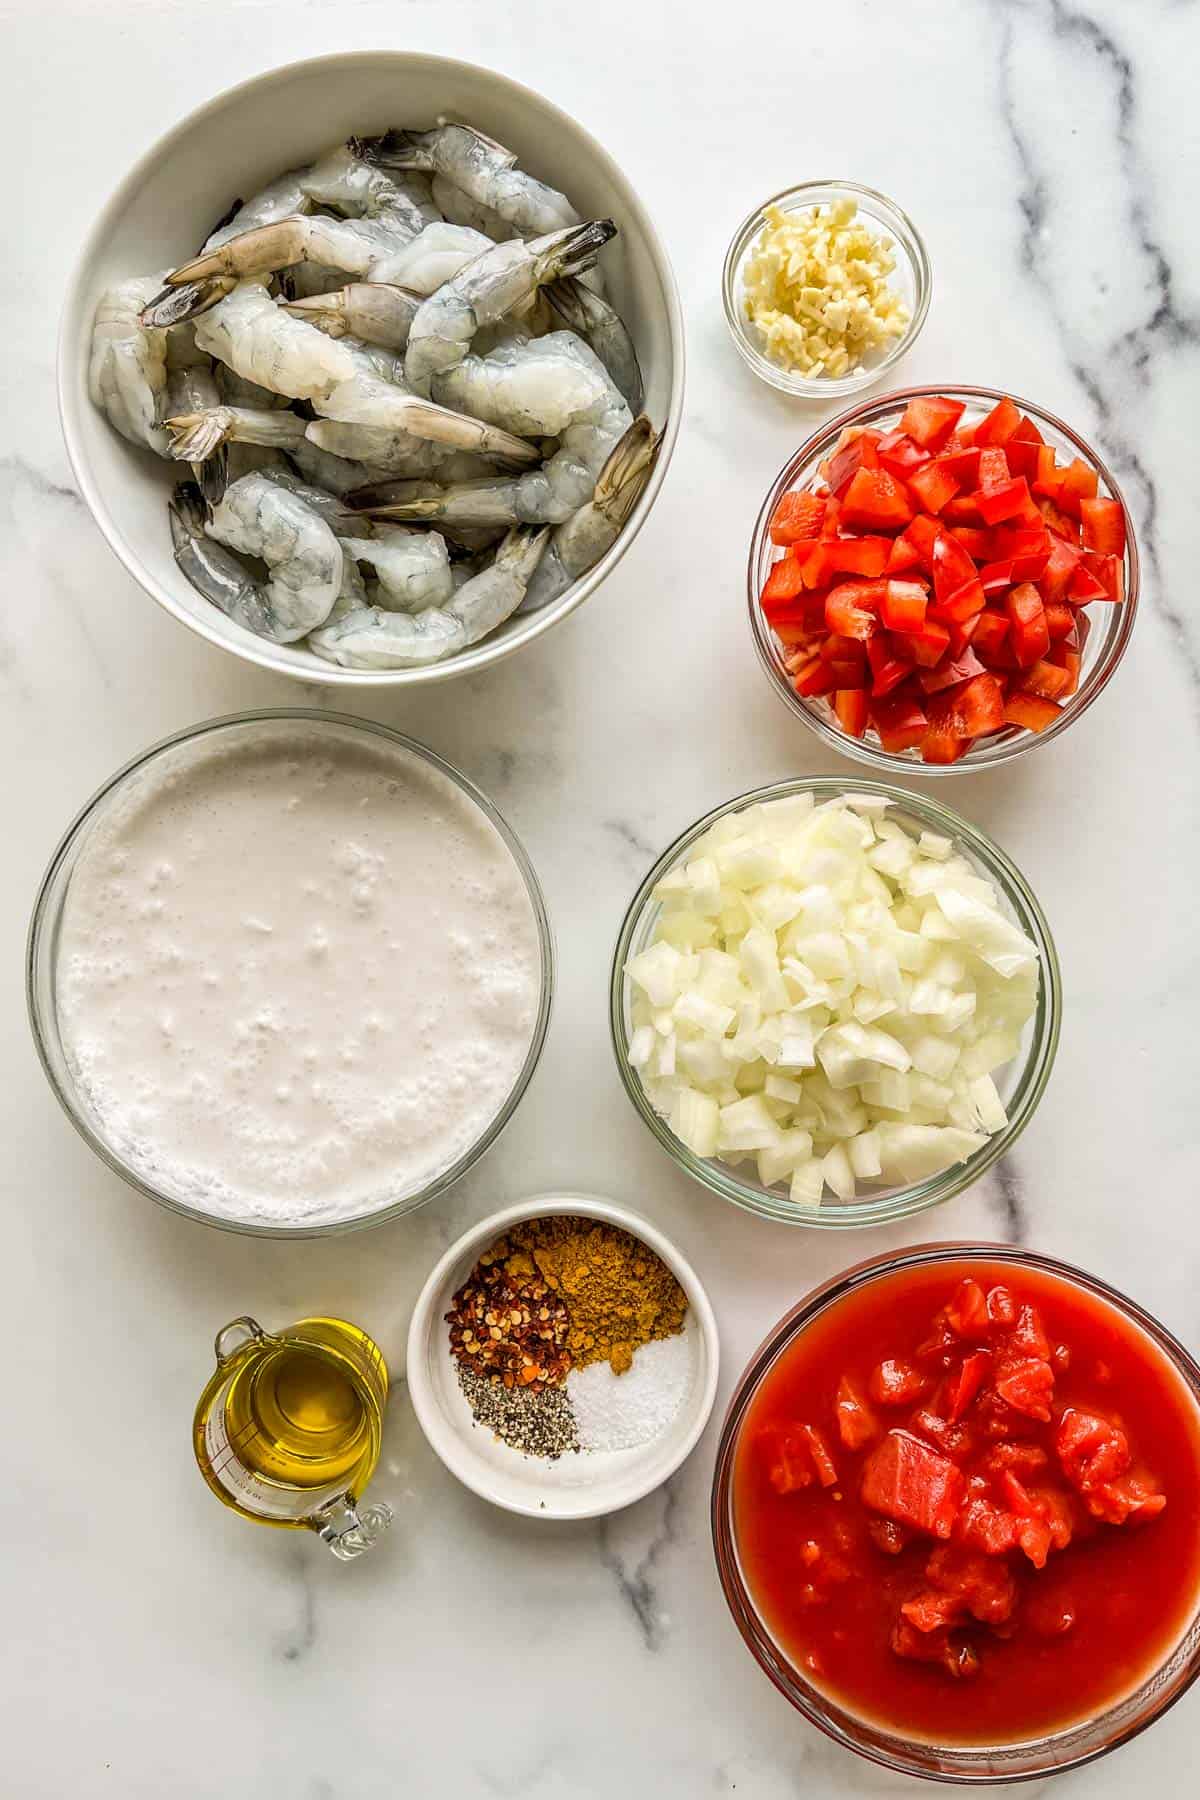 Ingredients for coconut shrimp curry.